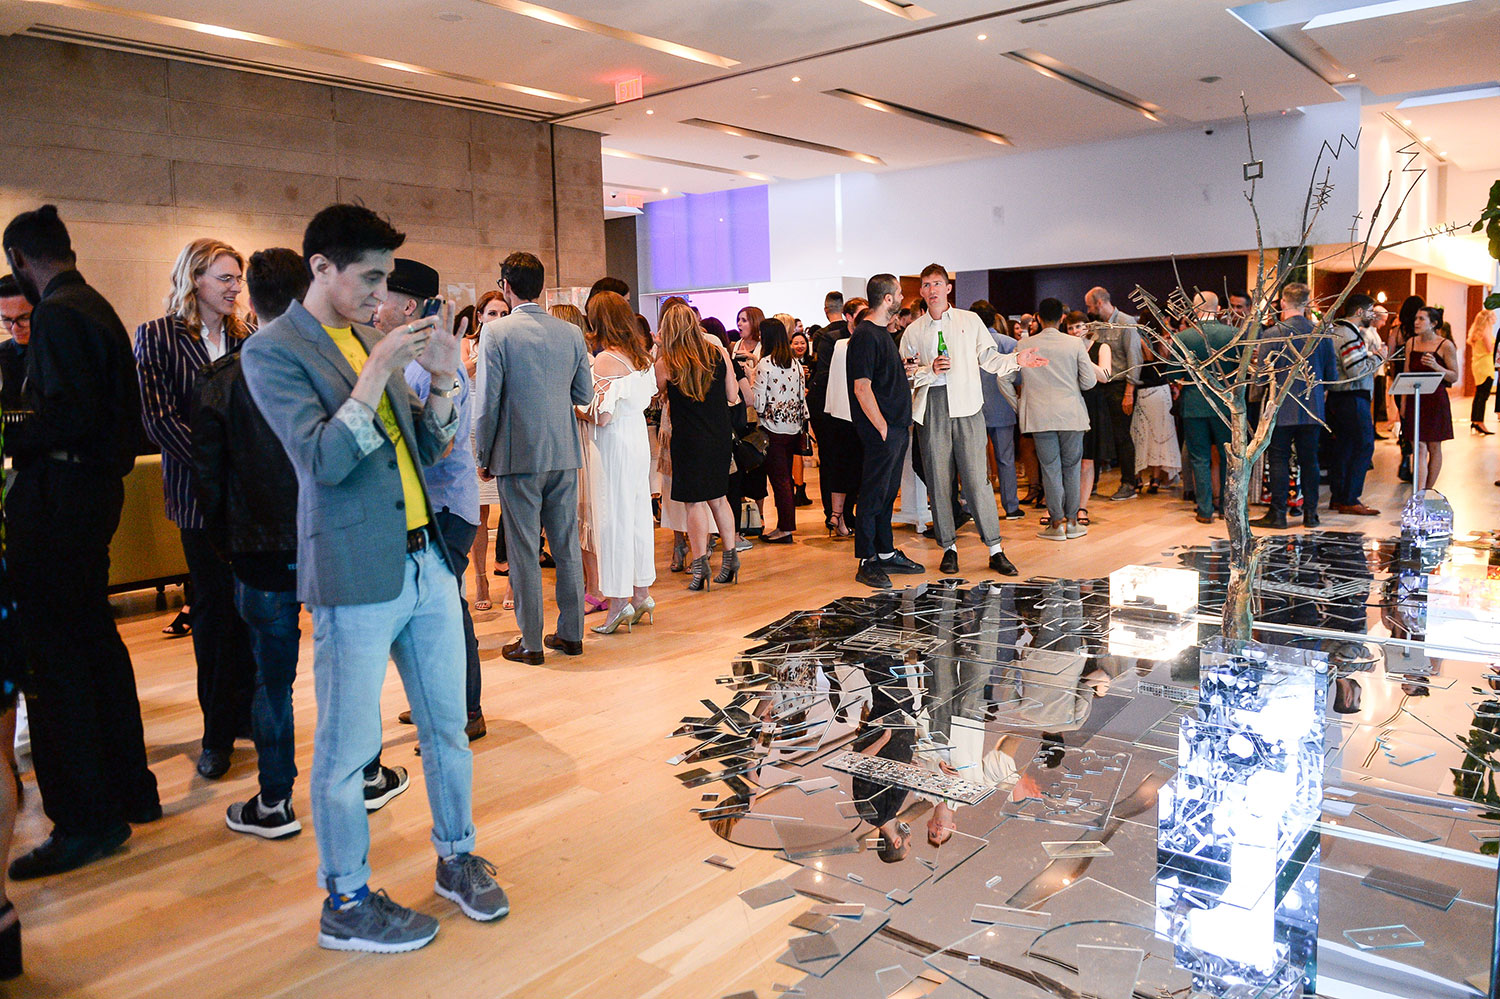 A crowded room of people with a man in the foreground taking a photo of an art installation made up of broken mirror shards on the floor and a tree